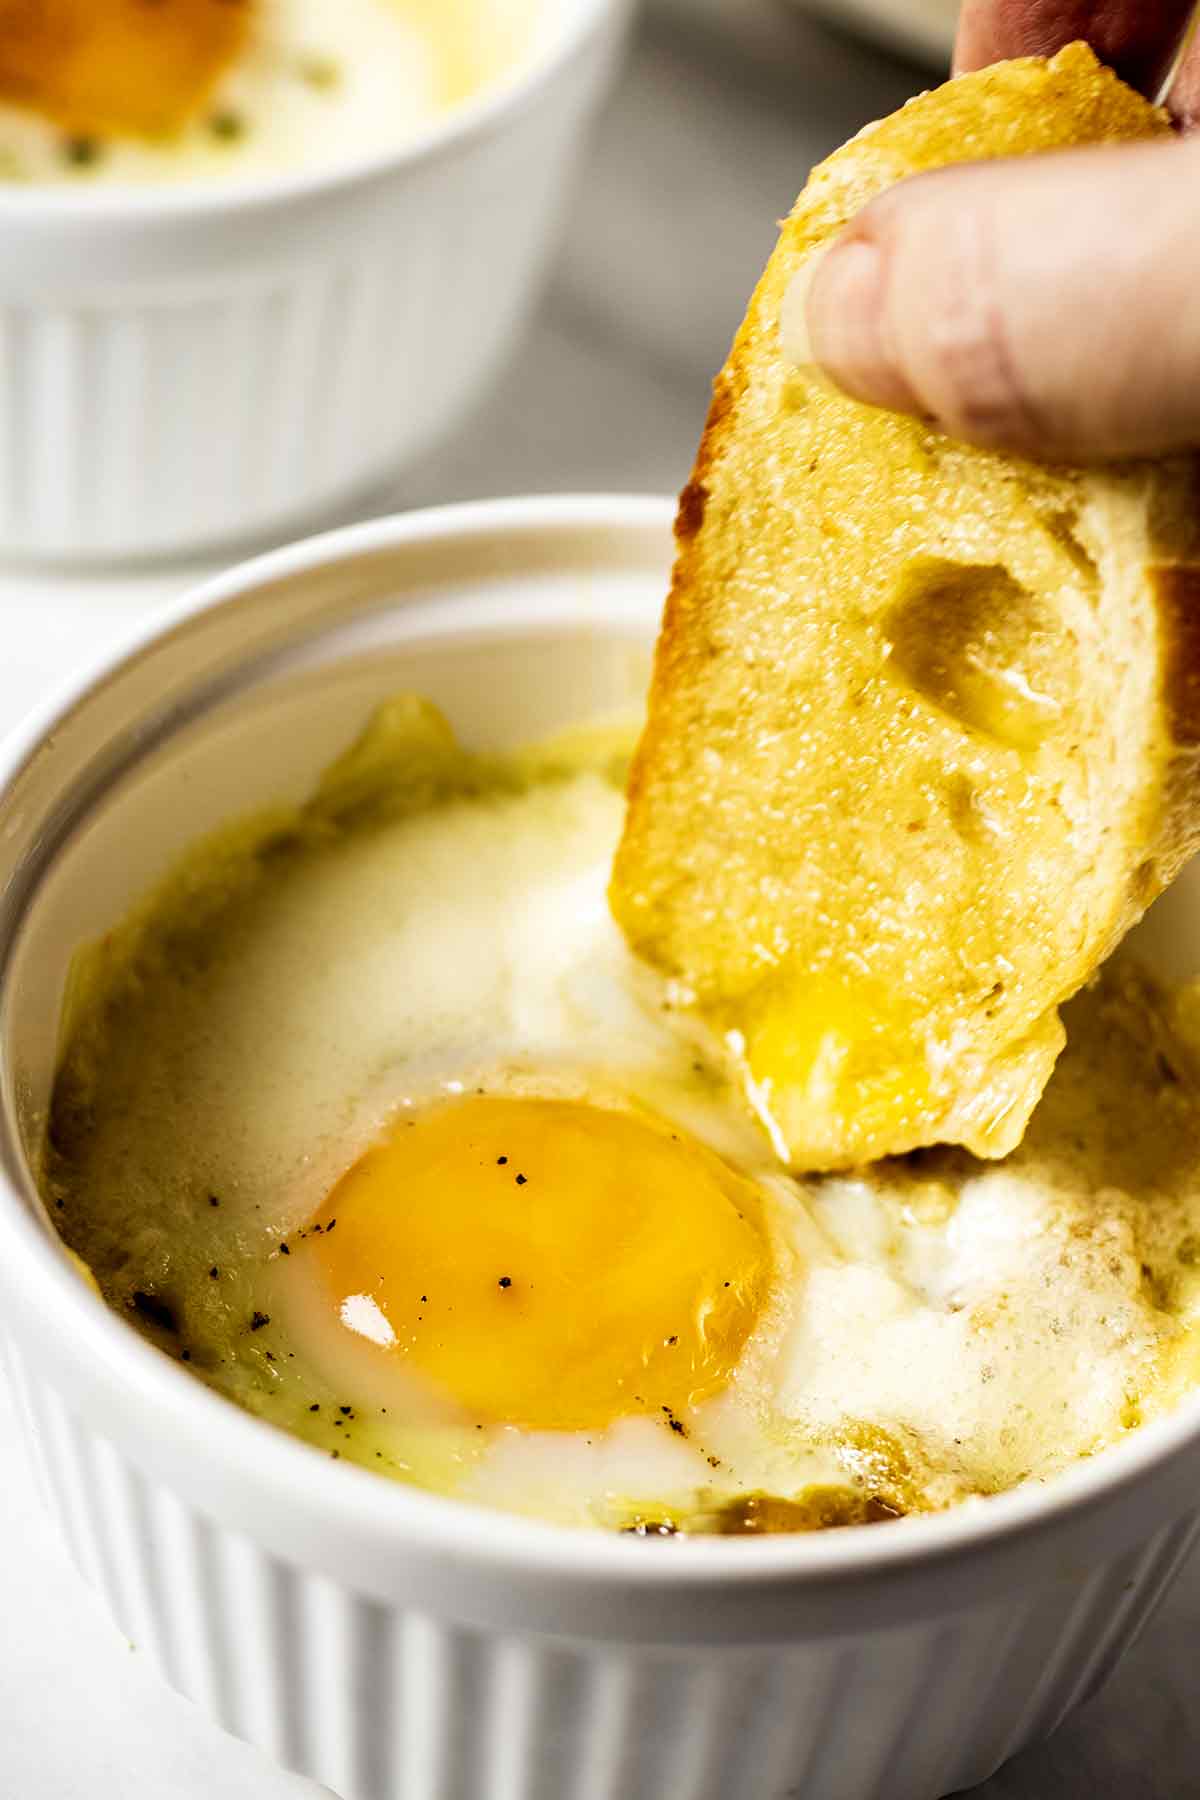 Toast being dipped into Swiss baked egg in a white ramekin